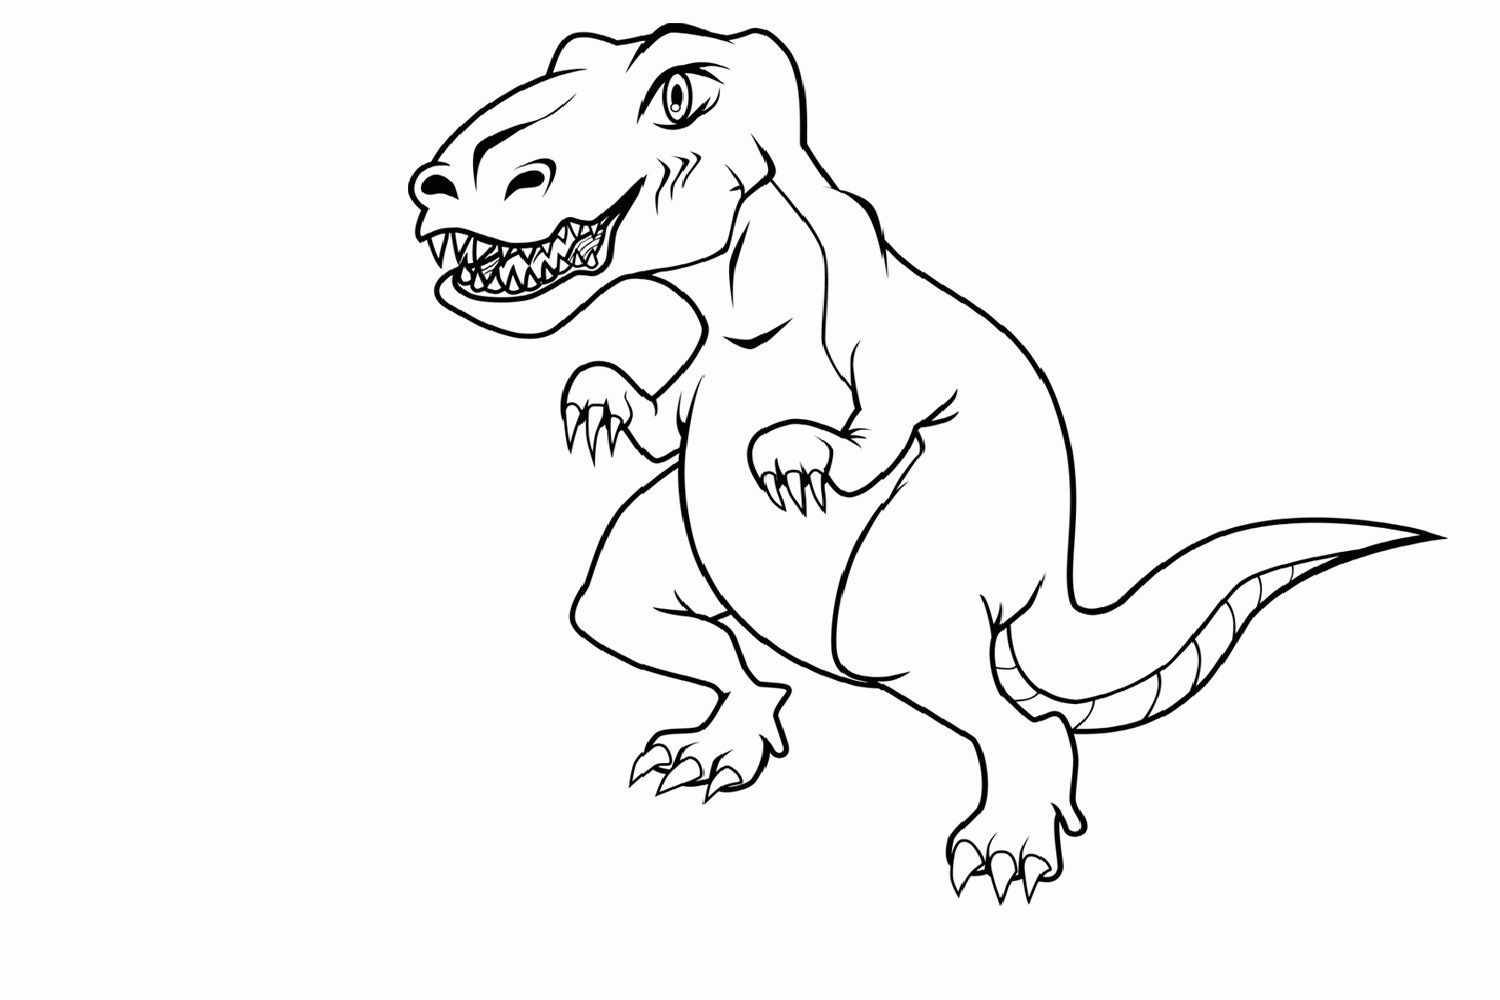 12 Pics of Dinosaur Coloring Pages To Print For Kids - Free ...